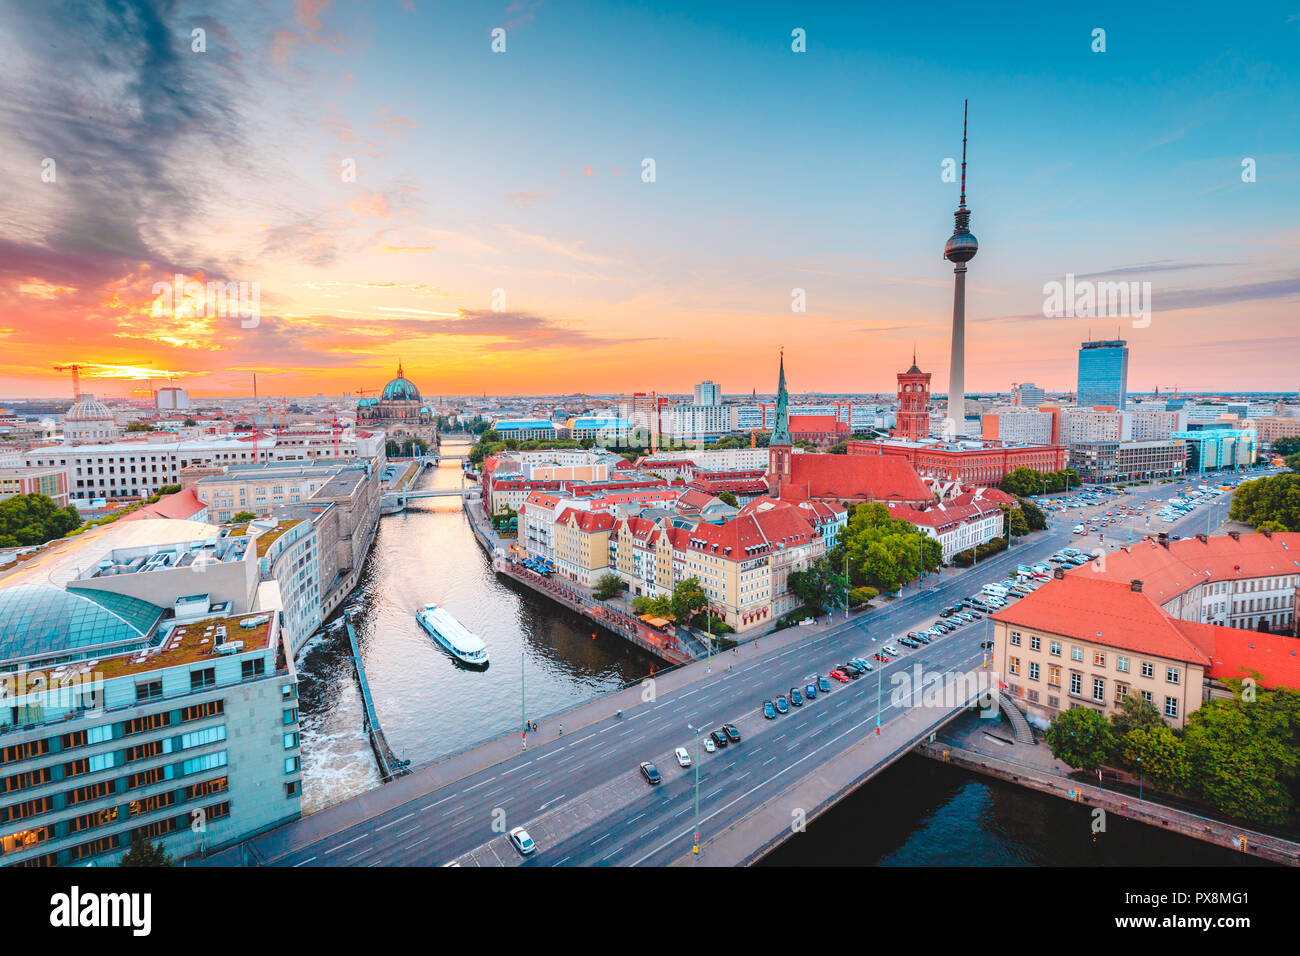 Classic view of Berlin skyline with famous TV tower and Spree in beautiful golden evening light at sunset, central Berlin Mitte, Germany Stock Photo